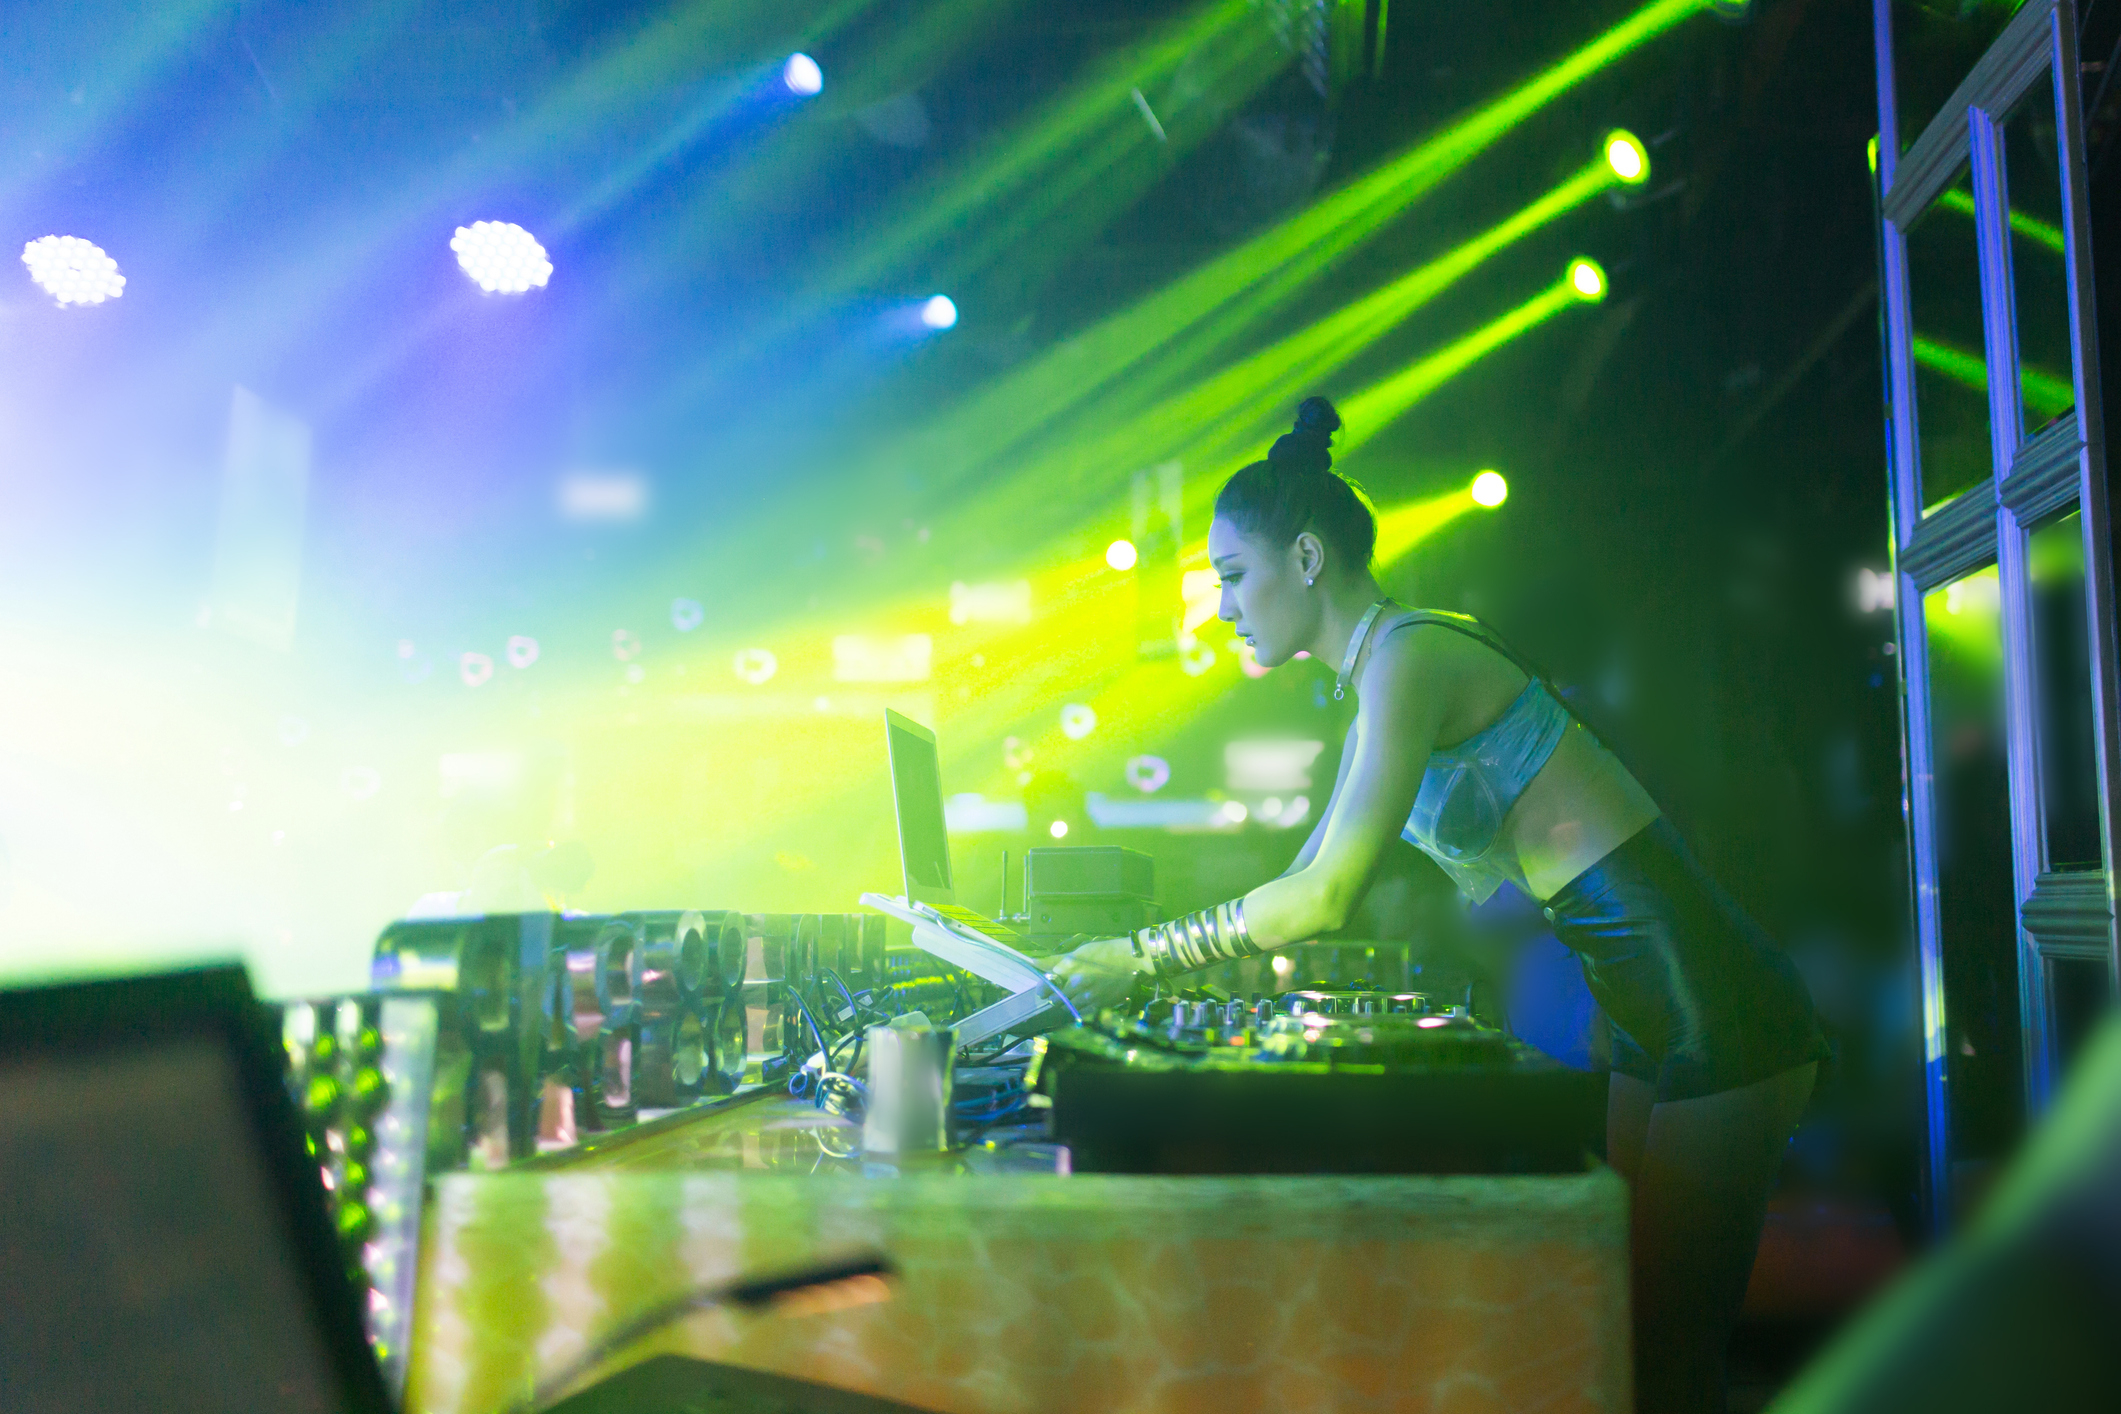 Woman DJing at a club with vibrant lights in the background